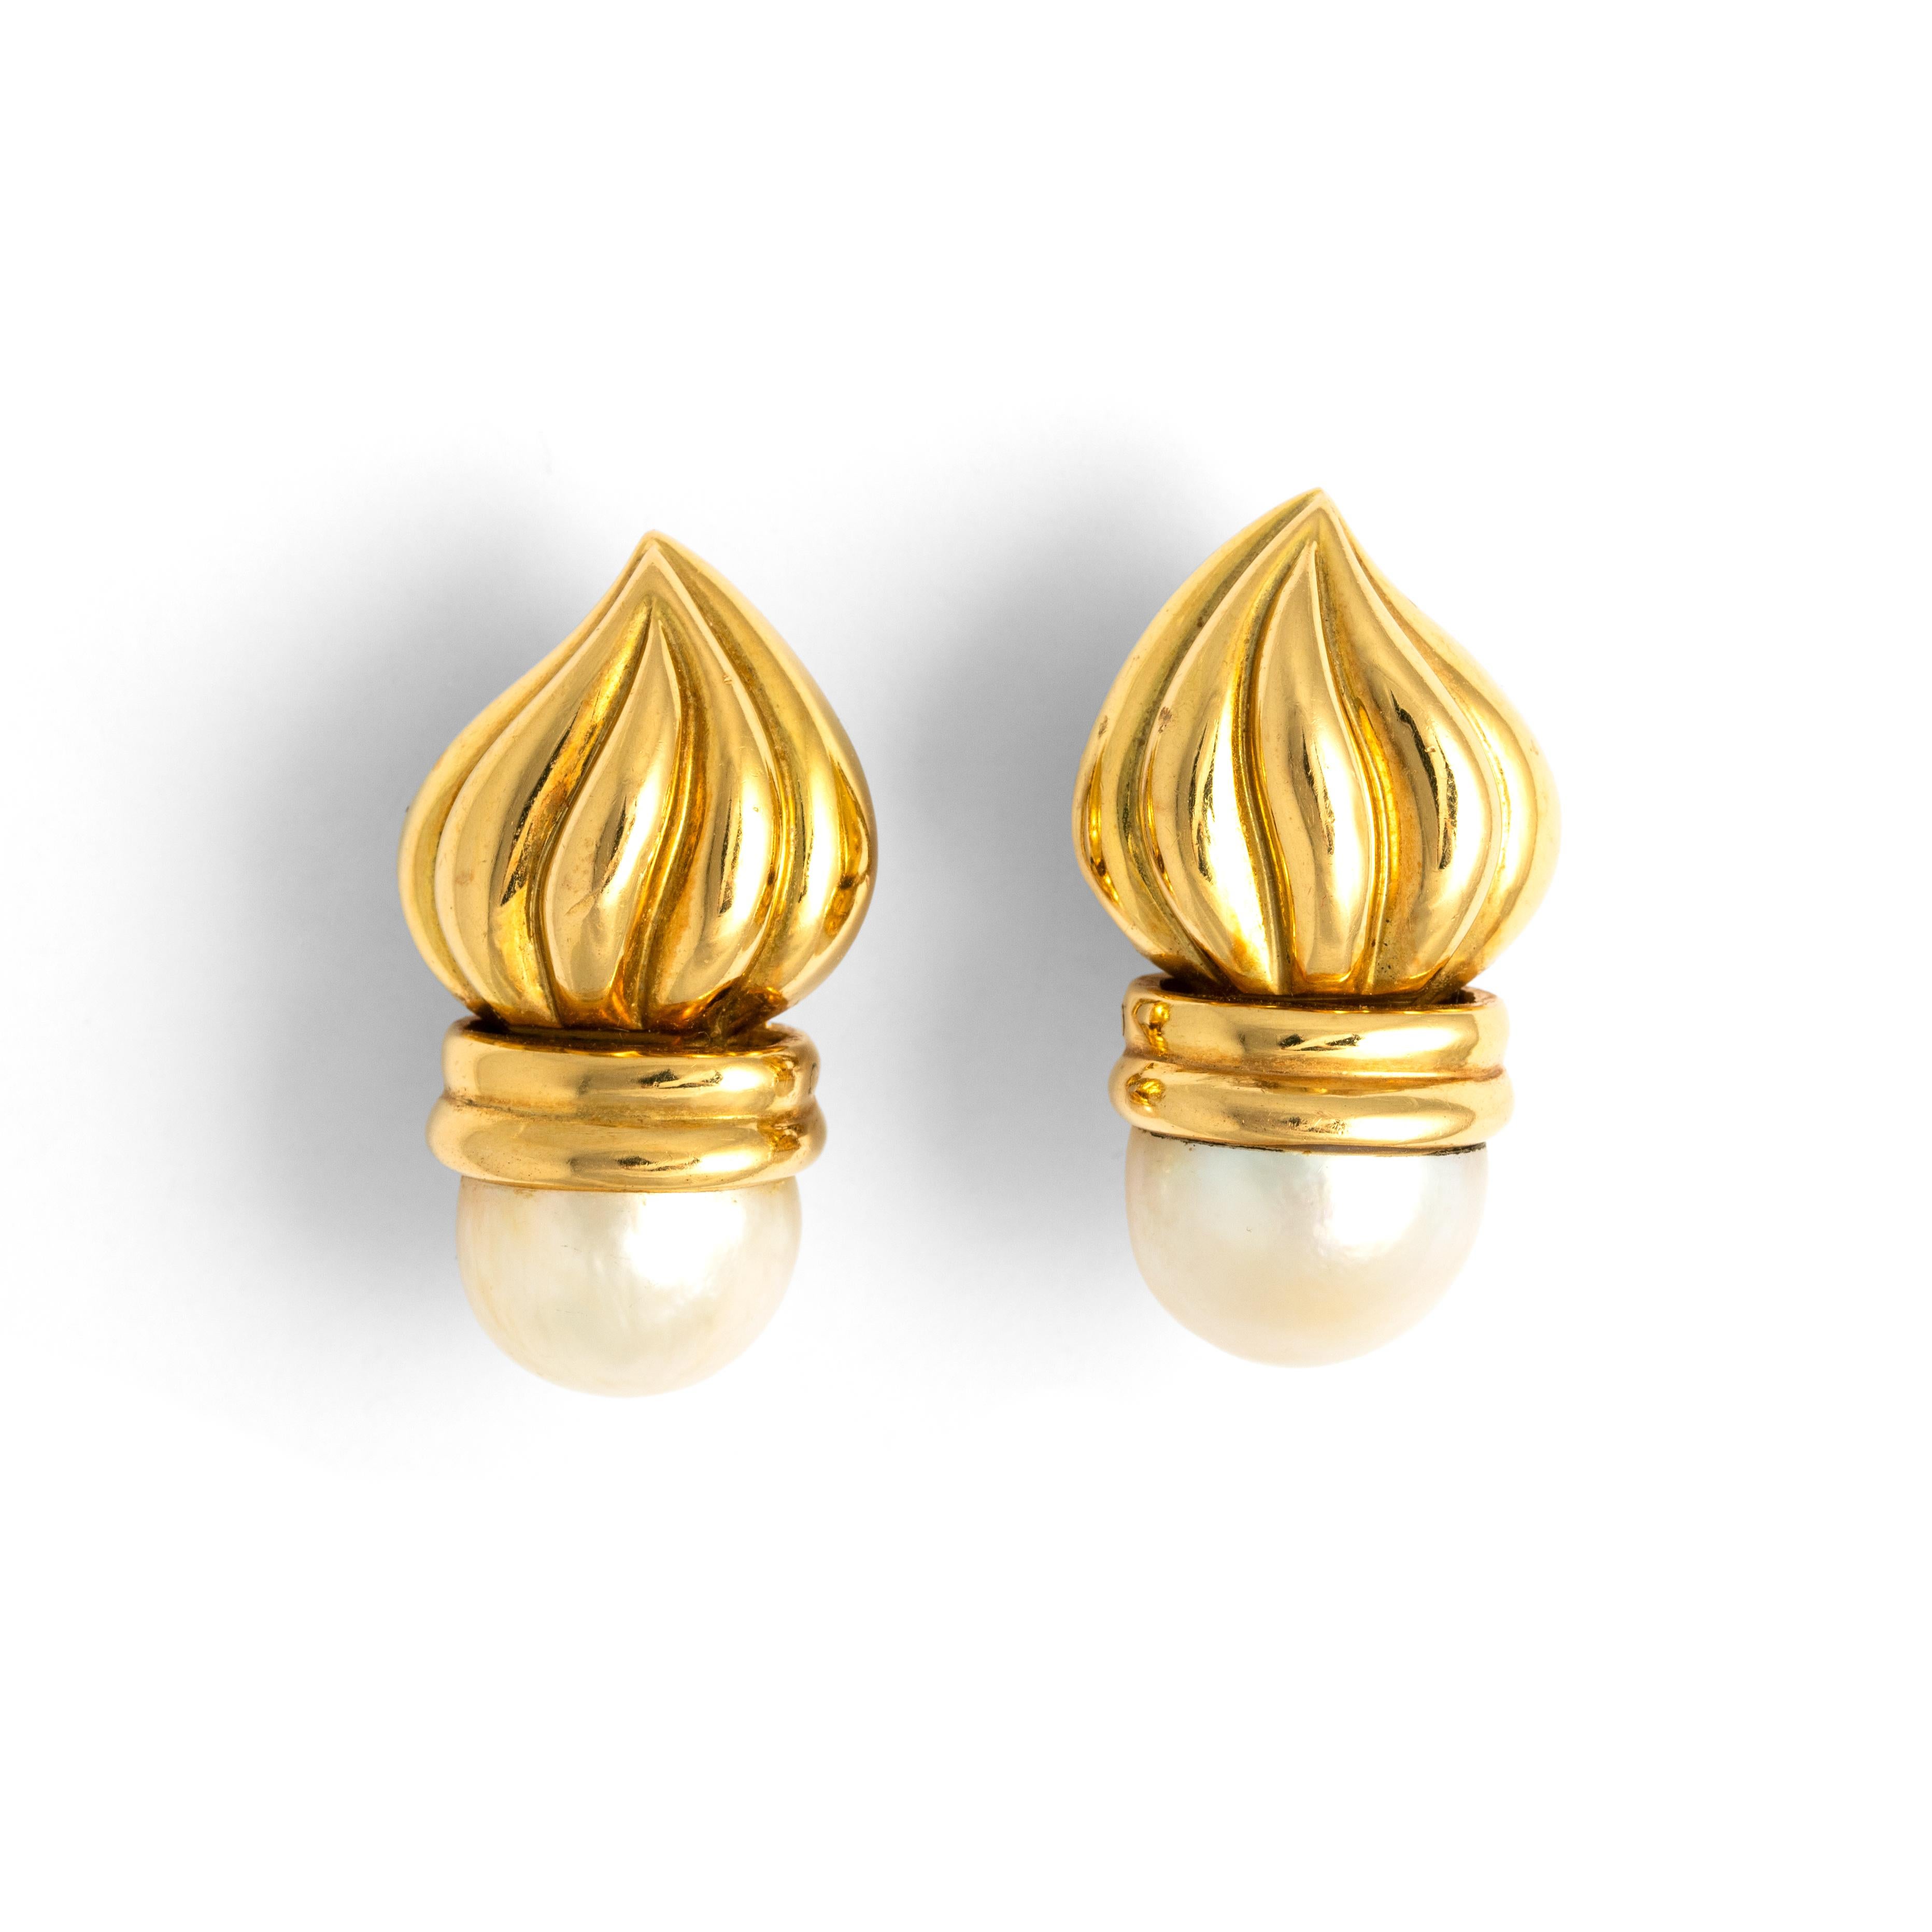 Benoit de Gorsky Yellow Gold 18K Pearl Earclips.
Width: maximum 2.00 centimeters.
Height: 3.50 centimeters.
Total weight: 45.73 grams.